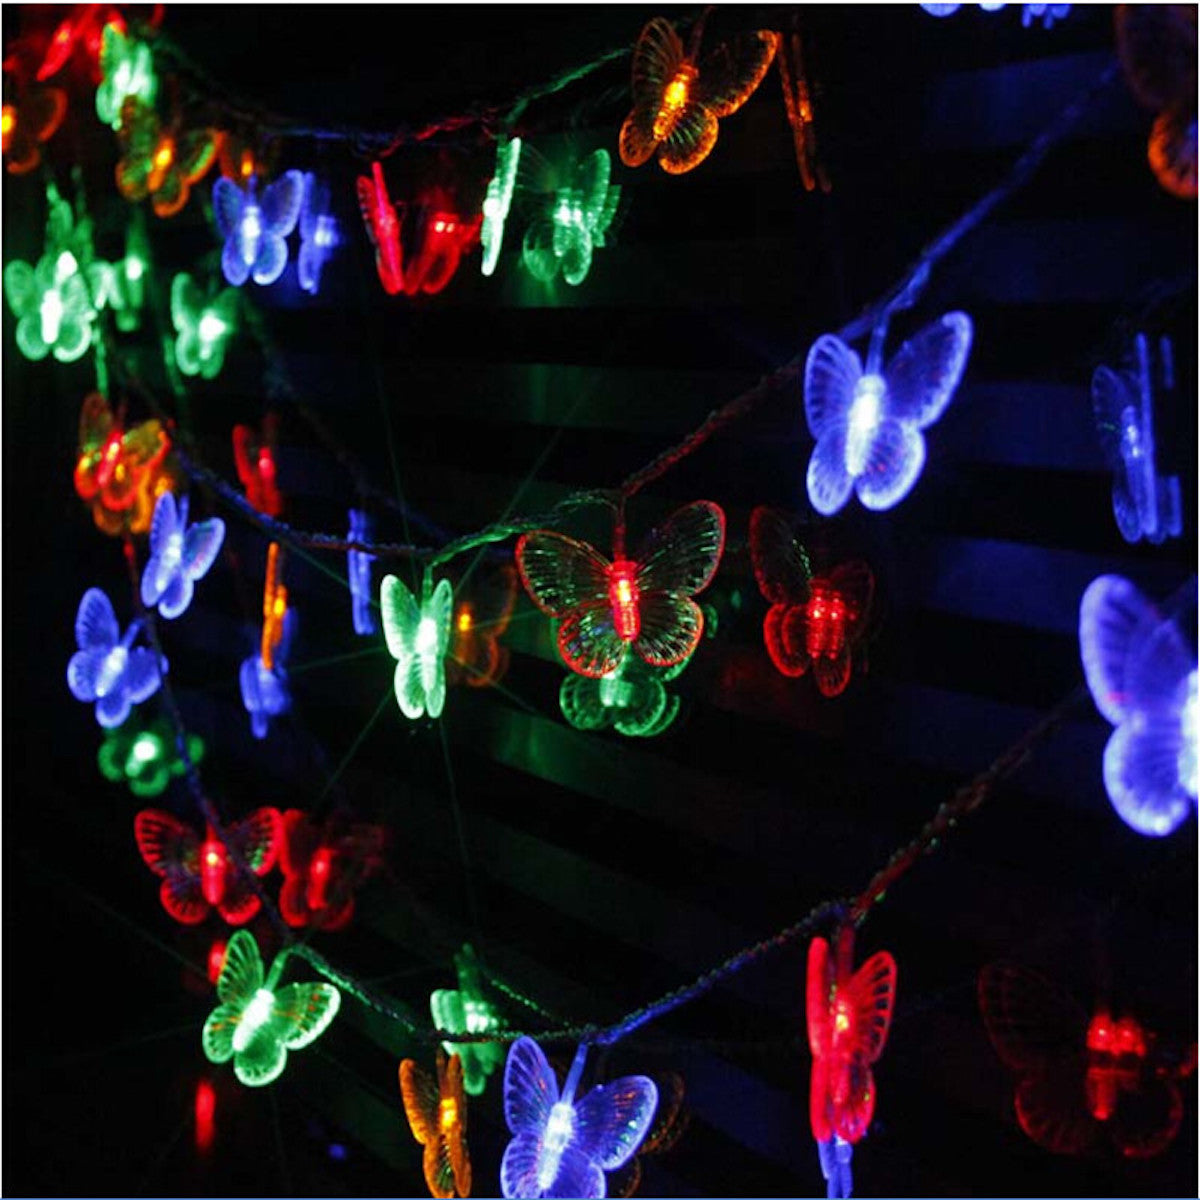 LED String Light ALiLA Copy of Butterfly LED String Light for Home office balcony garden window curtain decoration,  Warmwhite/3.5 meter LED String Light